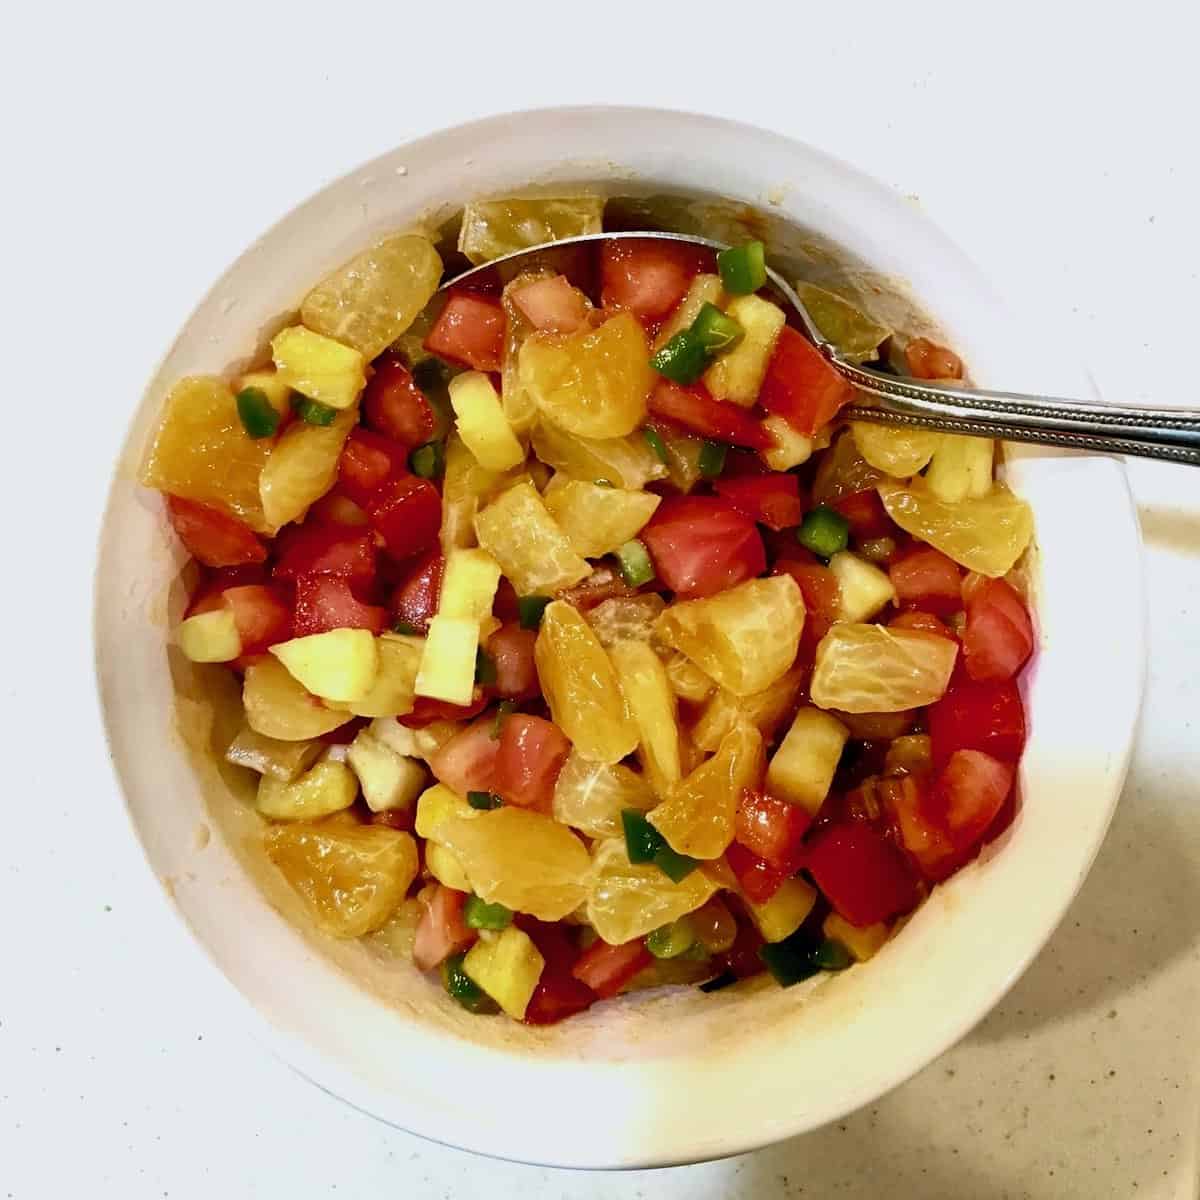 Pineapple-Orange Habanero Salsa goes well with unexpected shrimp tacos